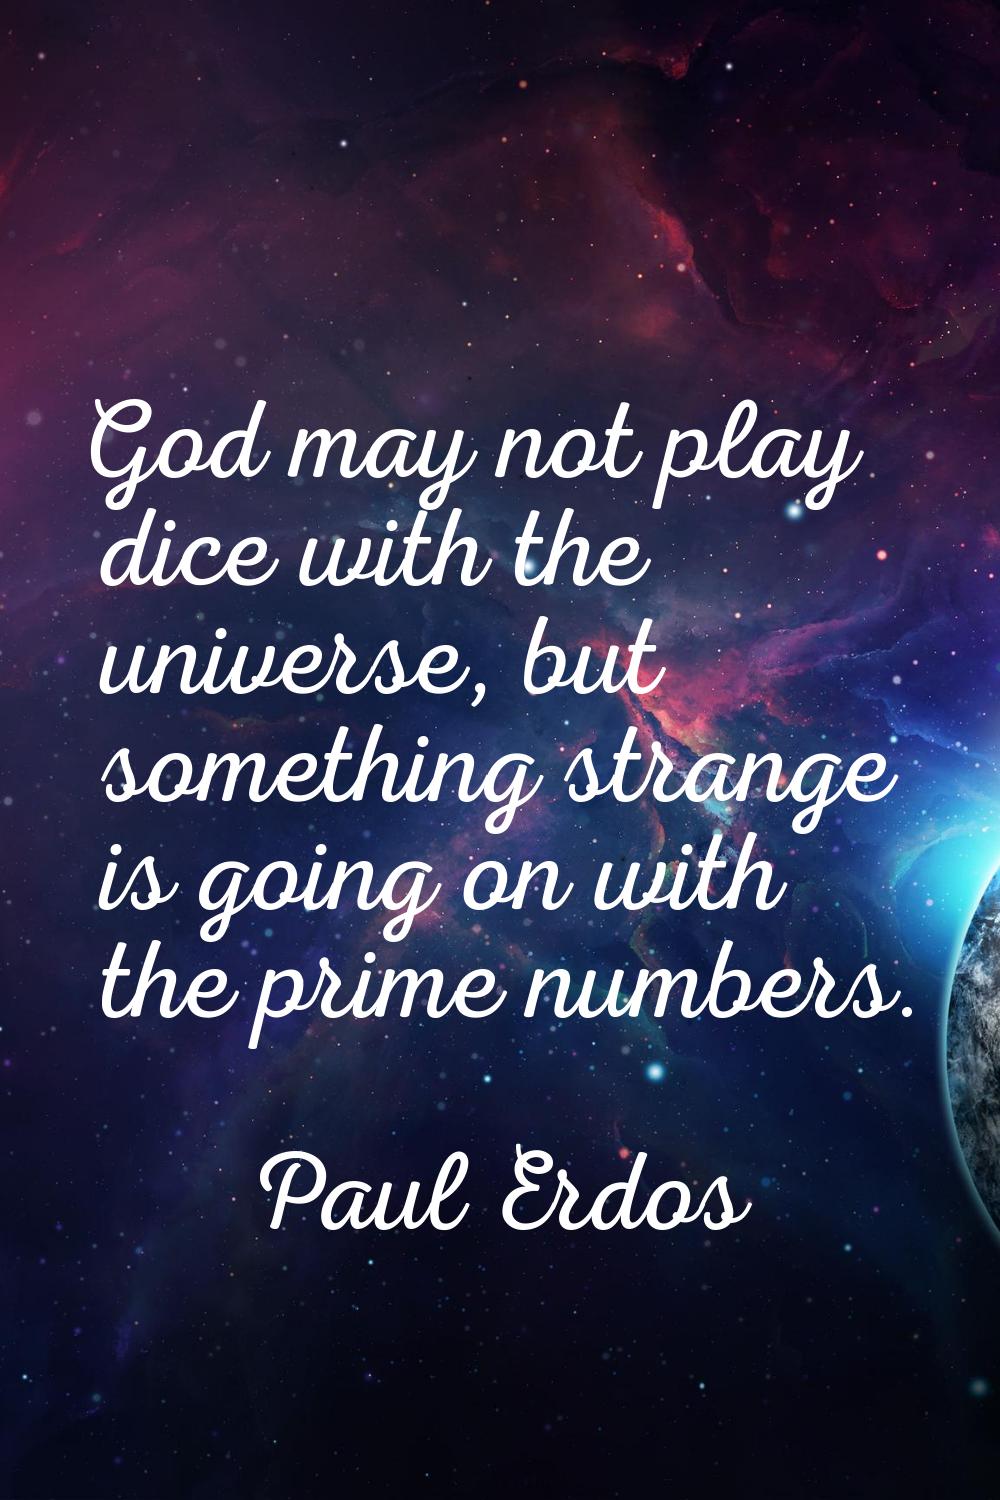 God may not play dice with the universe, but something strange is going on with the prime numbers.